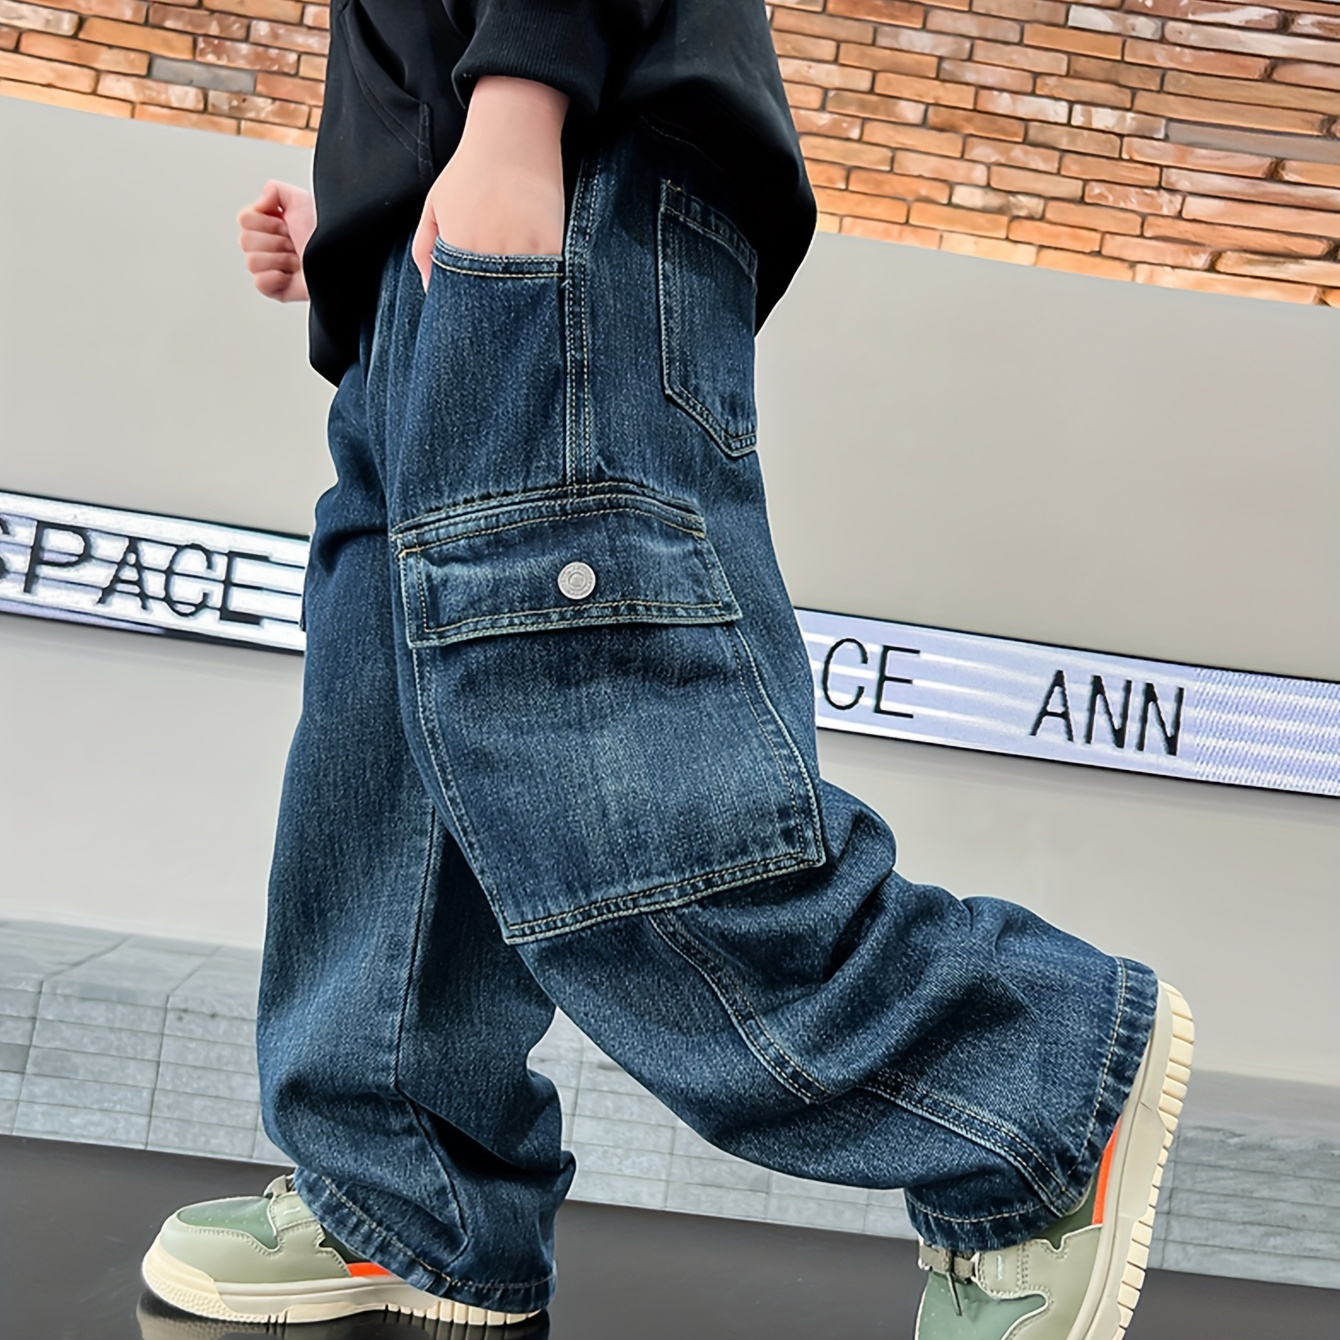 

Boys Harem Cargo Jeans - Casual Four-season Baggy Denim Long Pants With Elastic Waist For Teens, Comfortable Street Style And Outdoor Wear